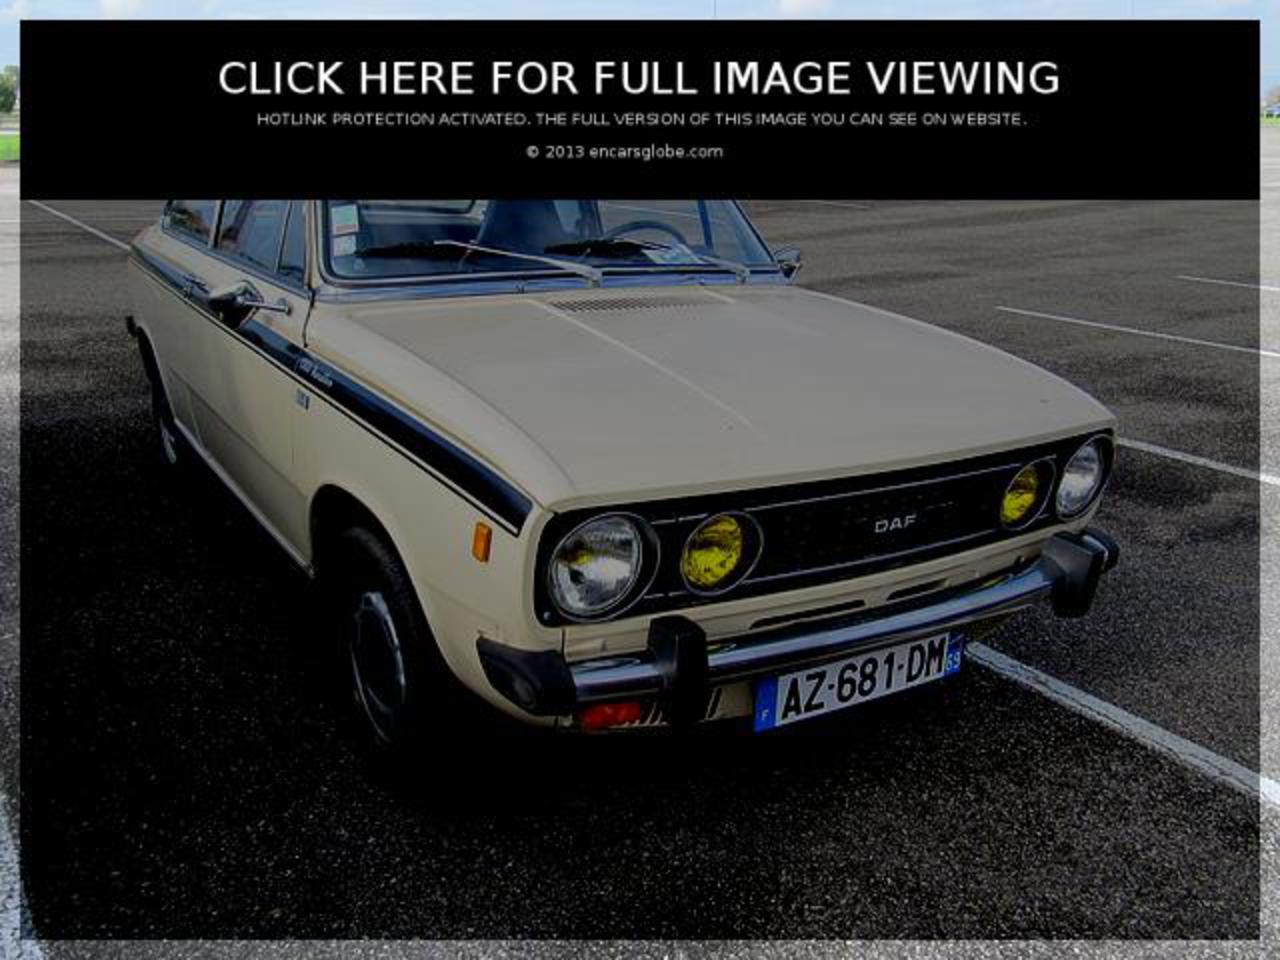 Daf 66 Marathon coupe Photo Gallery: Photo #11 out of 10, Image ...